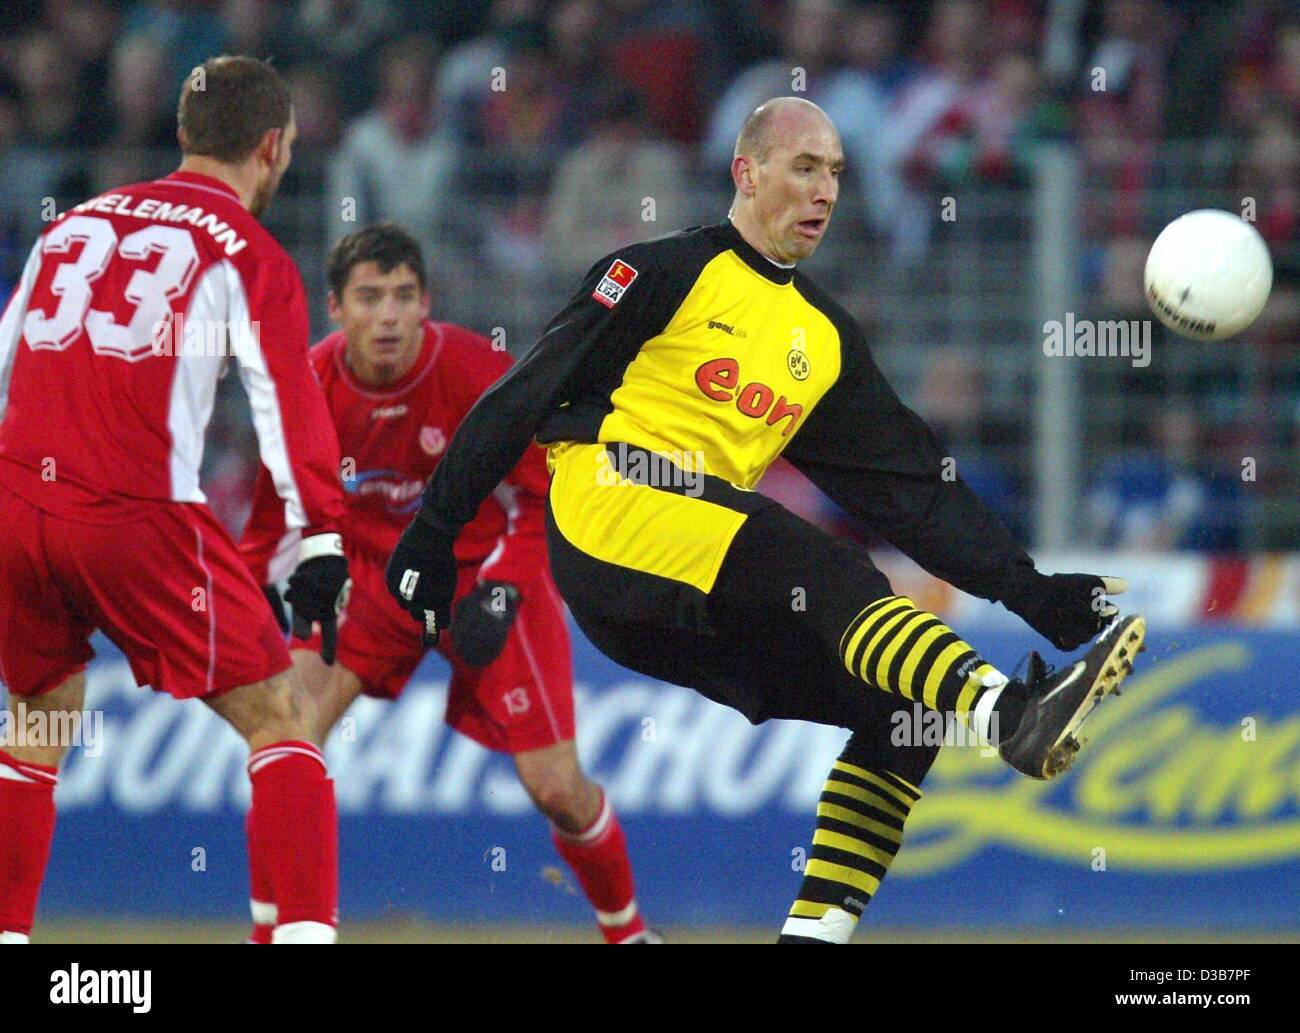 (dpa) - Dortmund's Czech forward Jan Koller (front R) kicks the ball while Cottbus players Ronny Thielemann (L) and Zsolt Loew from Hungary (back) look on, during the Bundesliga soccer match FC Energie Cottbus against Borussia Dortmund in Cottbus, Germany, 14 December 2002. Cottbus was defeated 0-4  Stock Photo